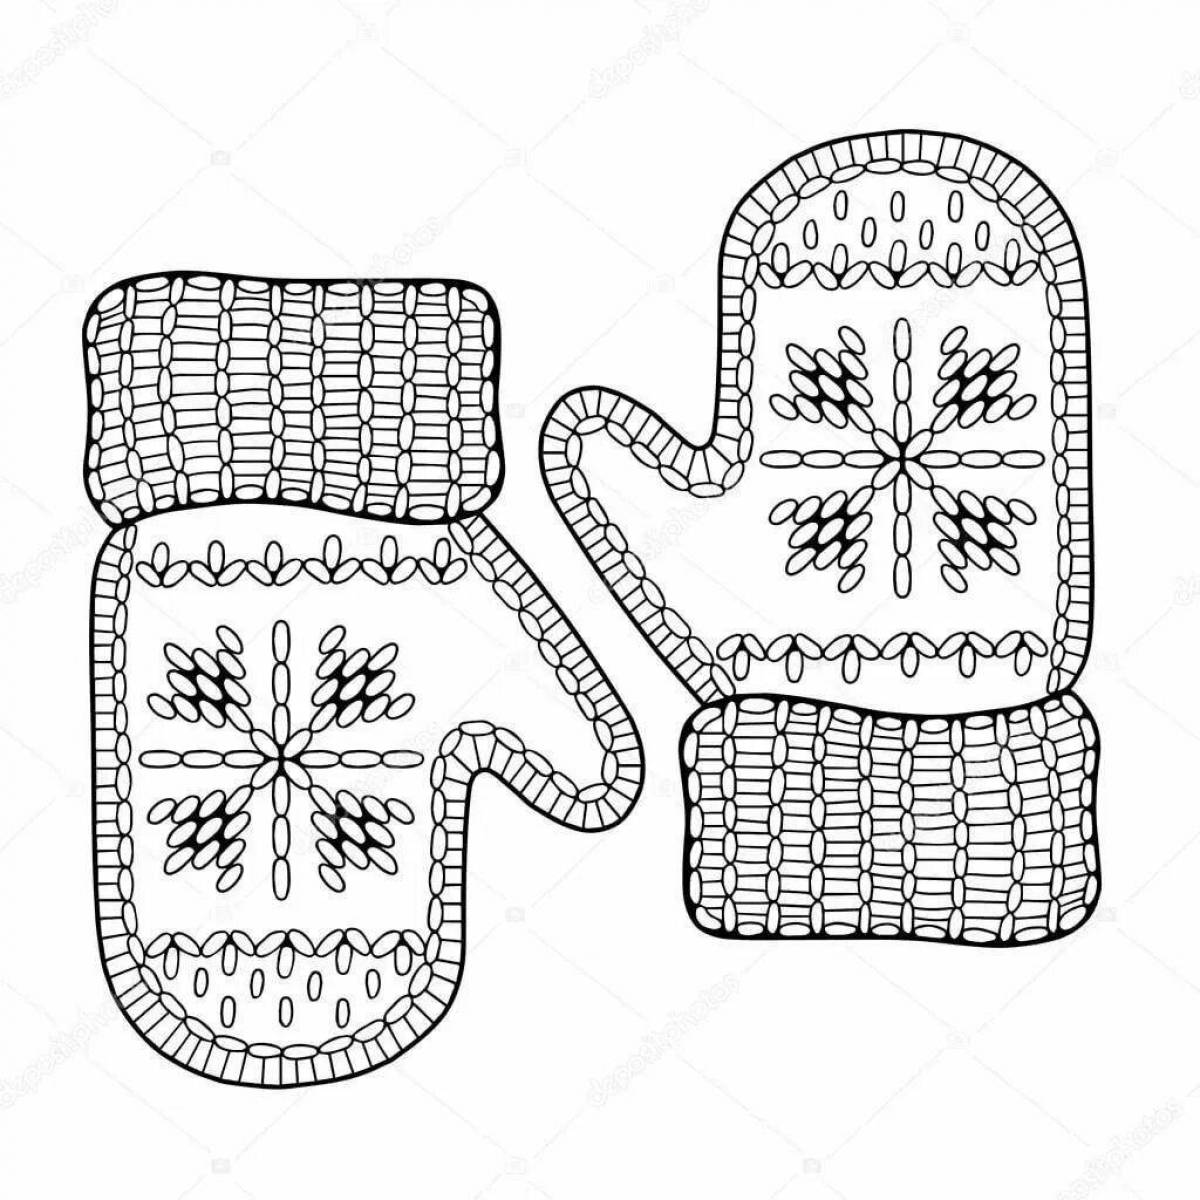 Patterned mittens for kids #5